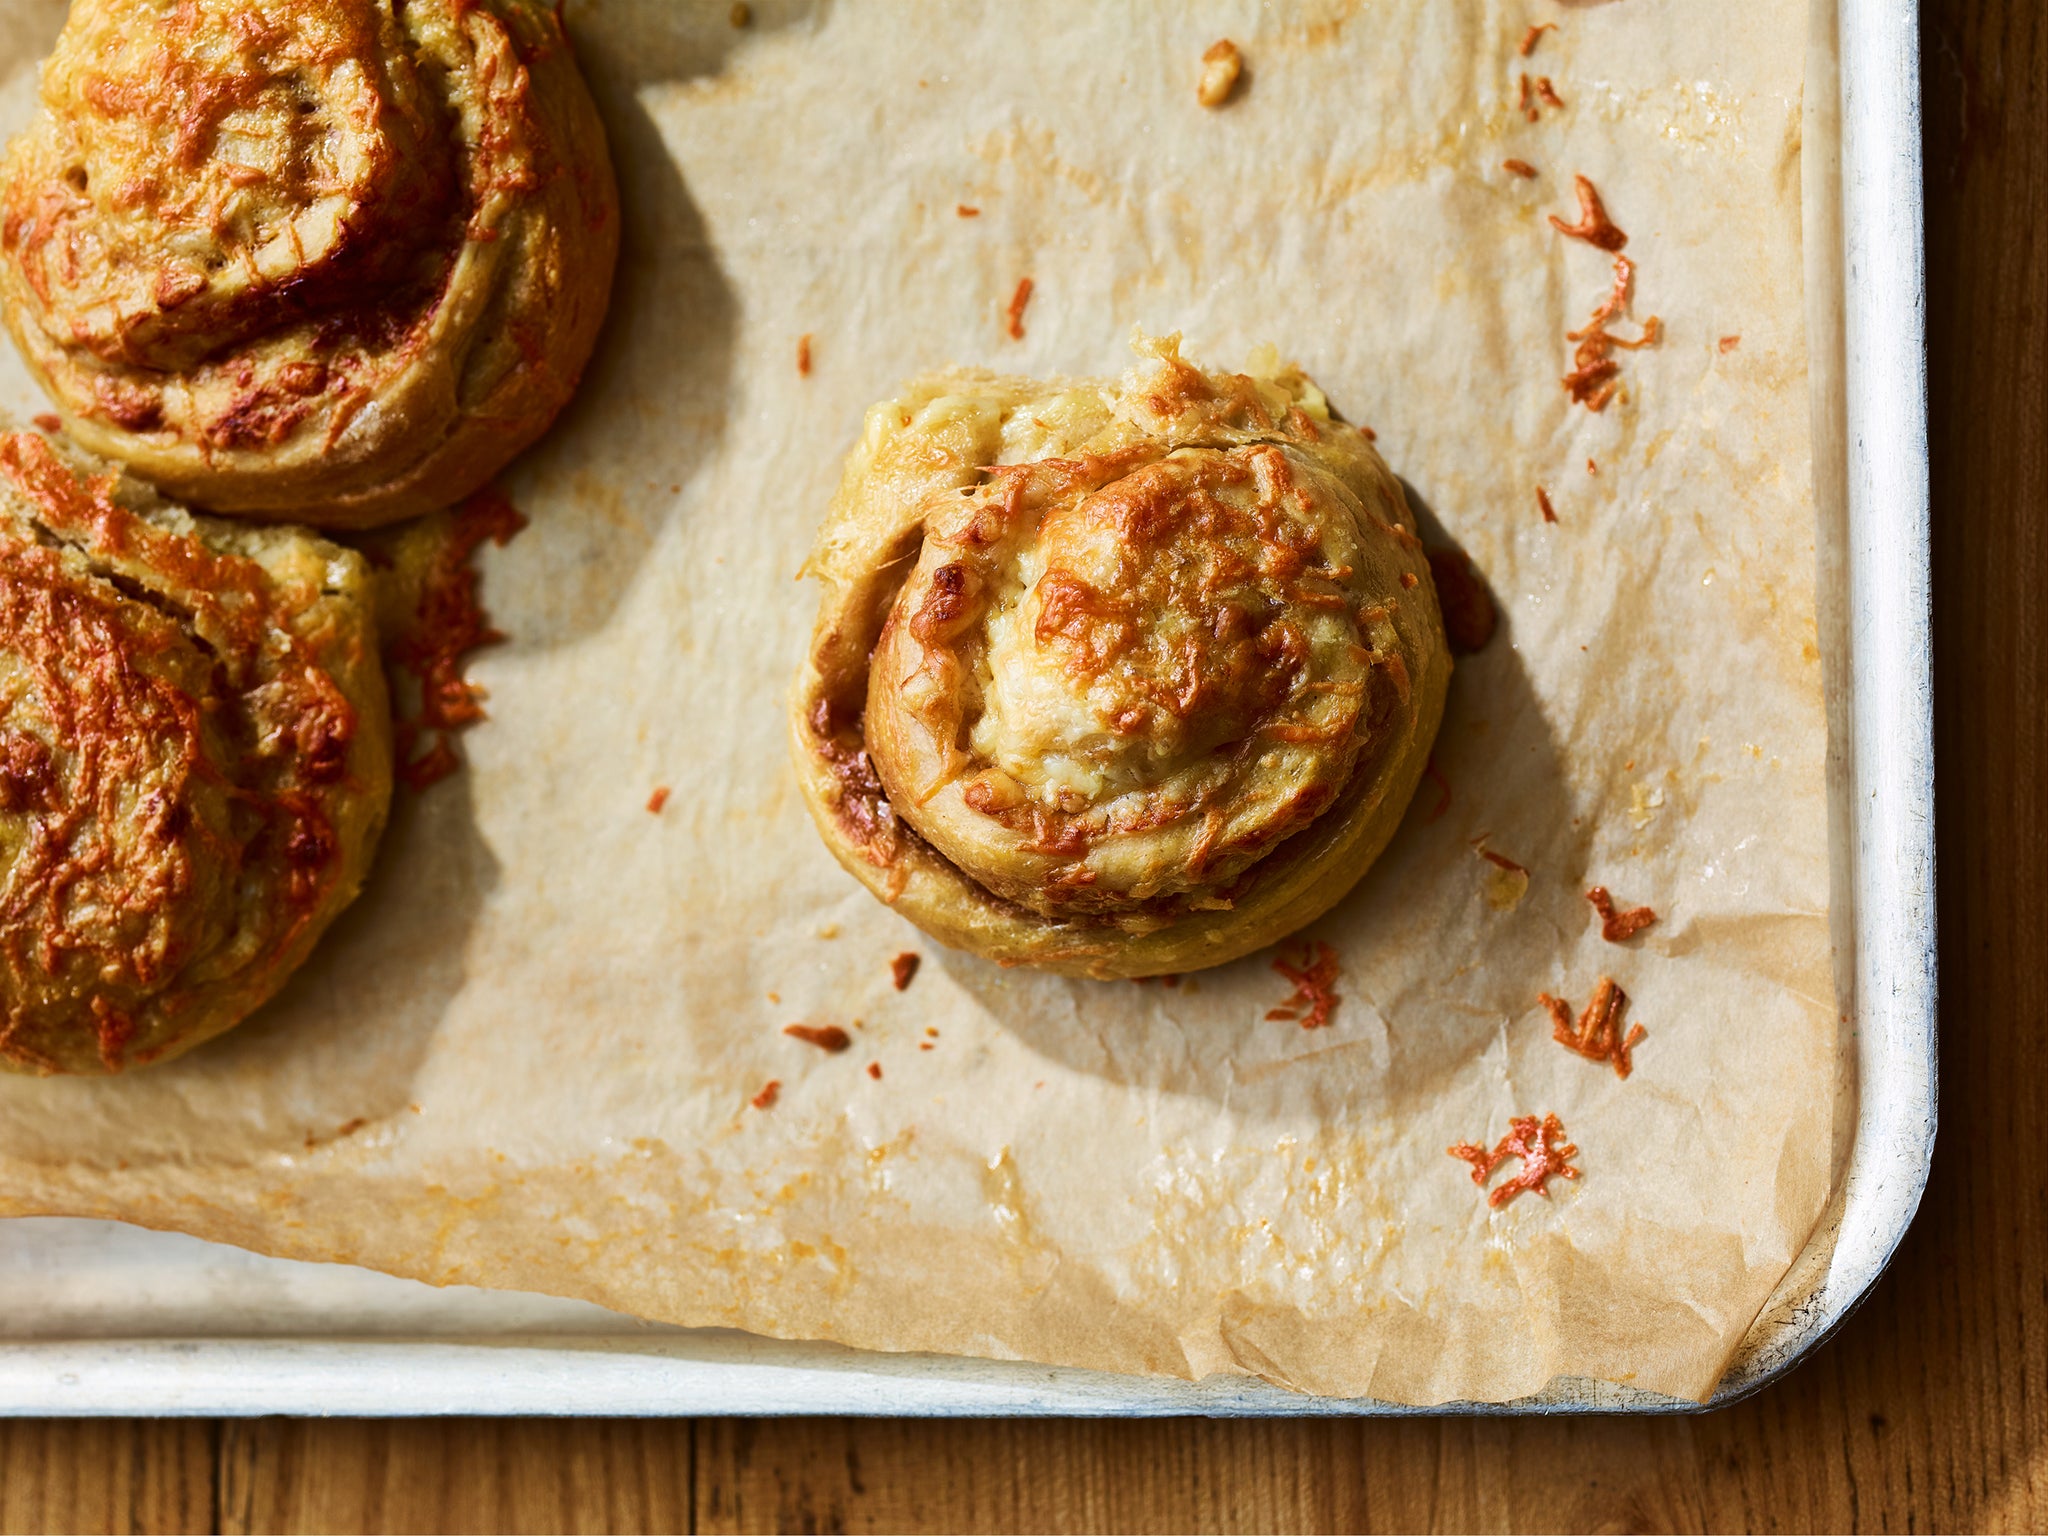 Inspired by Swash’s time in Australia, these flavoursome bread scrolls are a favourite of wife Stacey Solomon’s